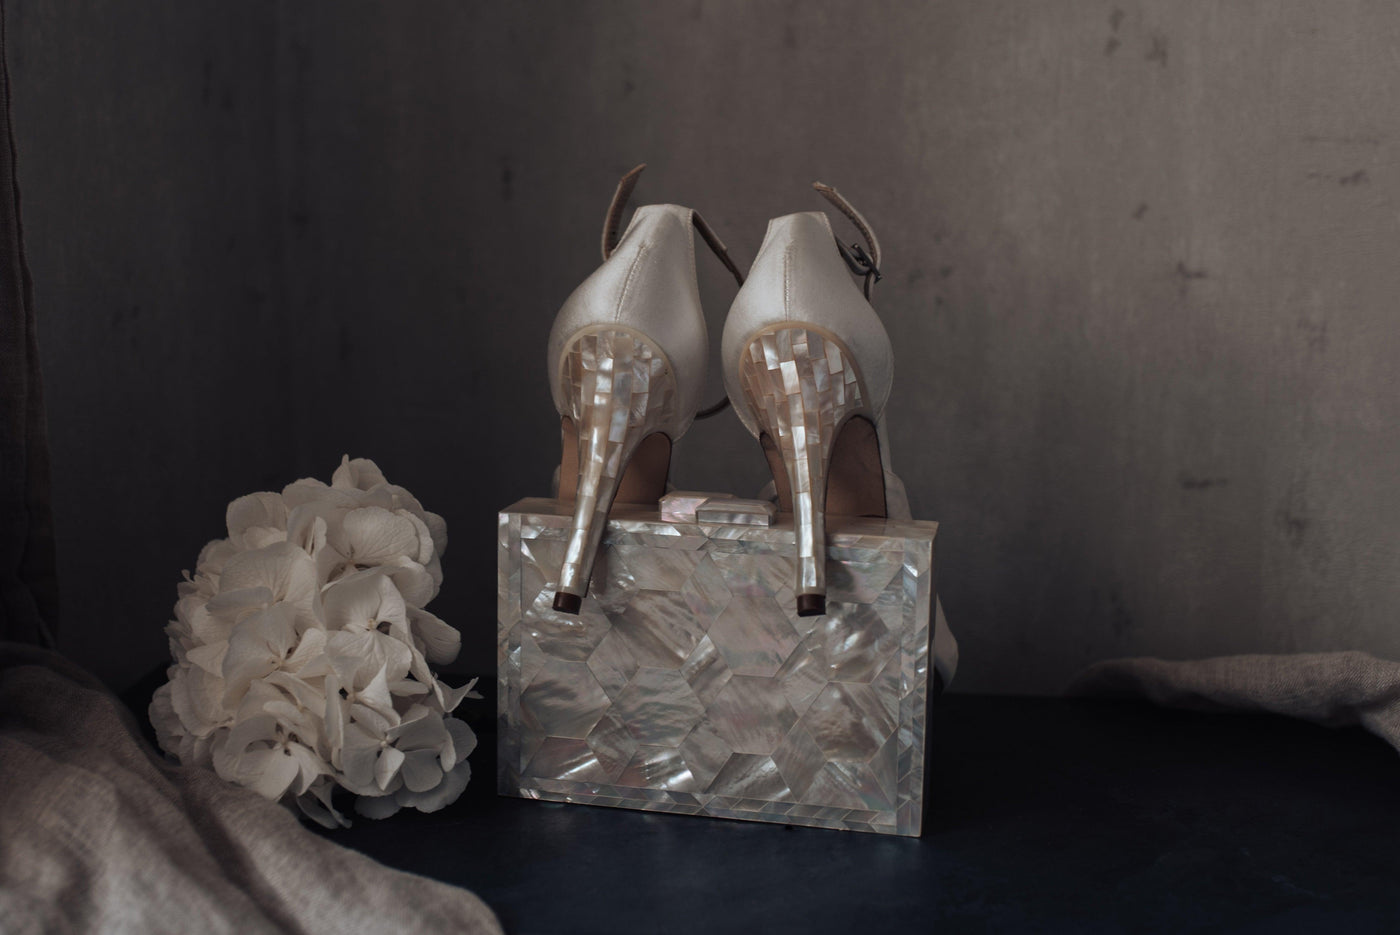 NEWSLETTER EXCLUSIVE | SUMMER SALE - Freya Rose Pearl Shoes and Jewellery